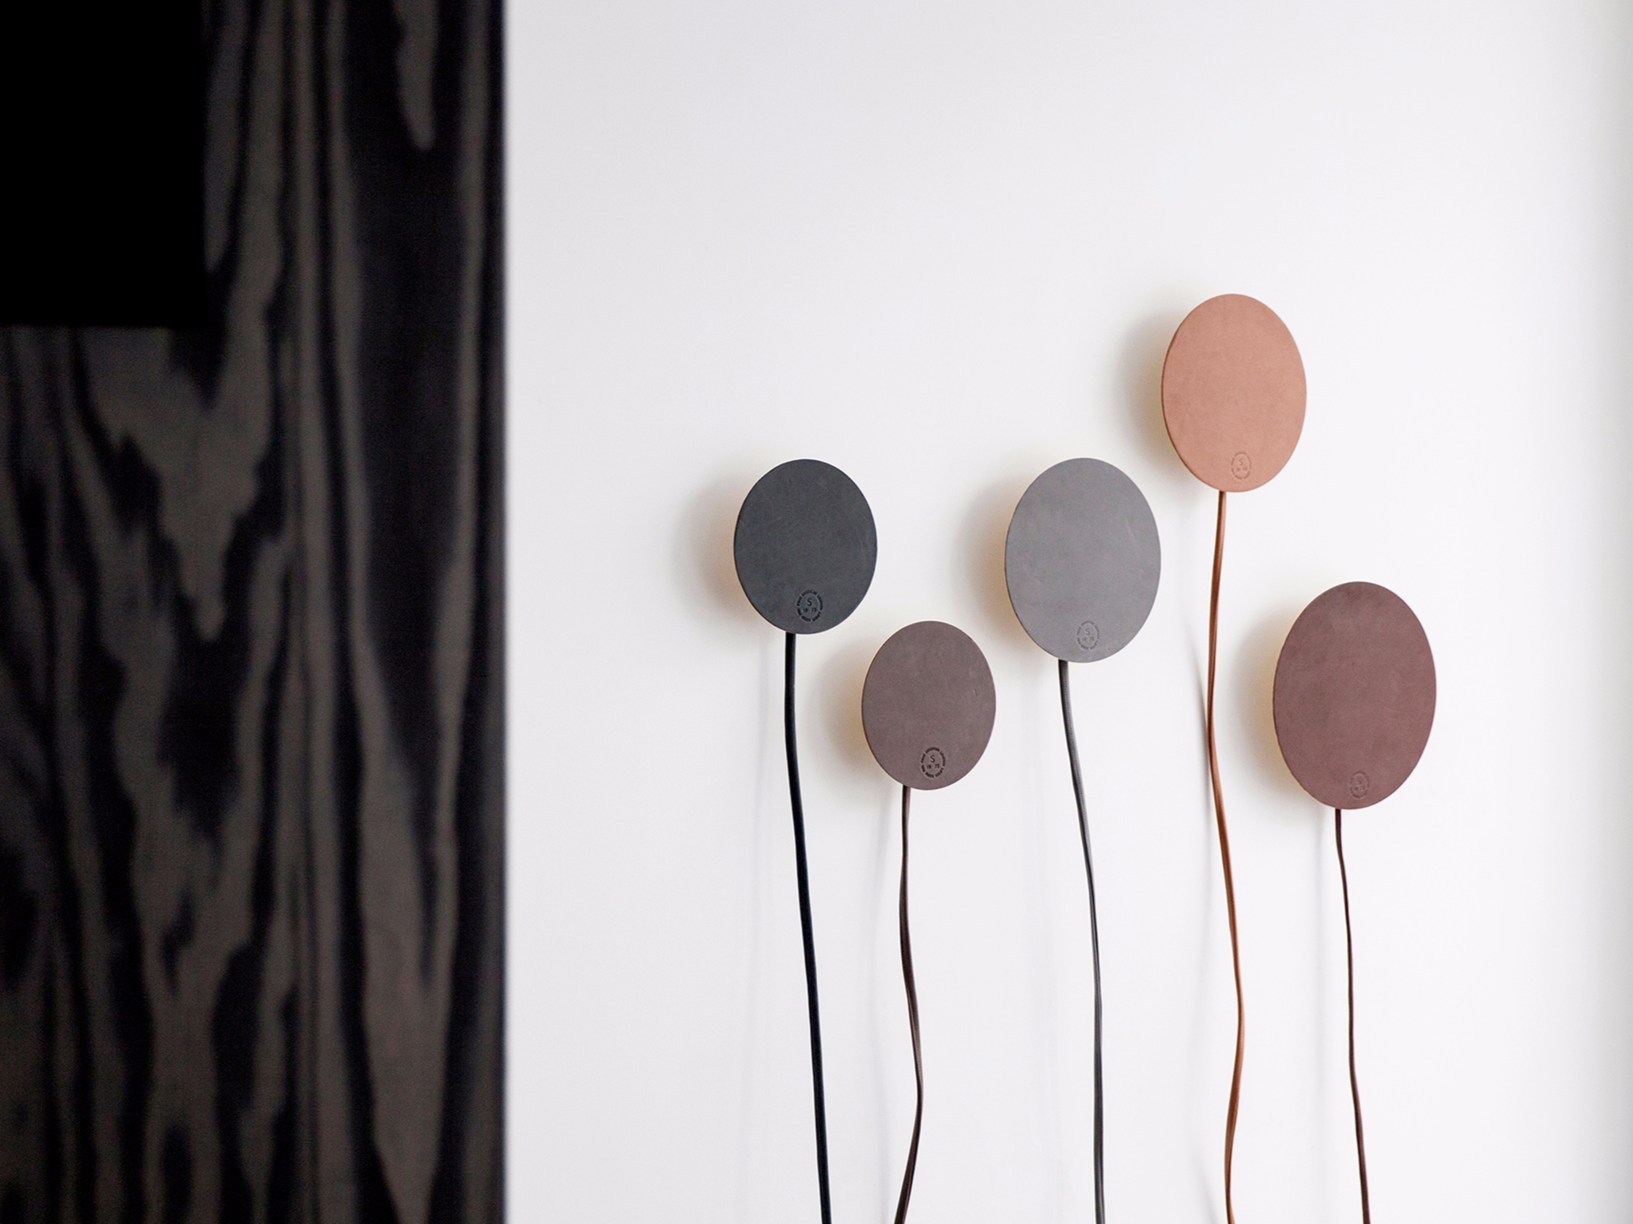 Drift Lamps by Norm Architects for Sørensen Leather